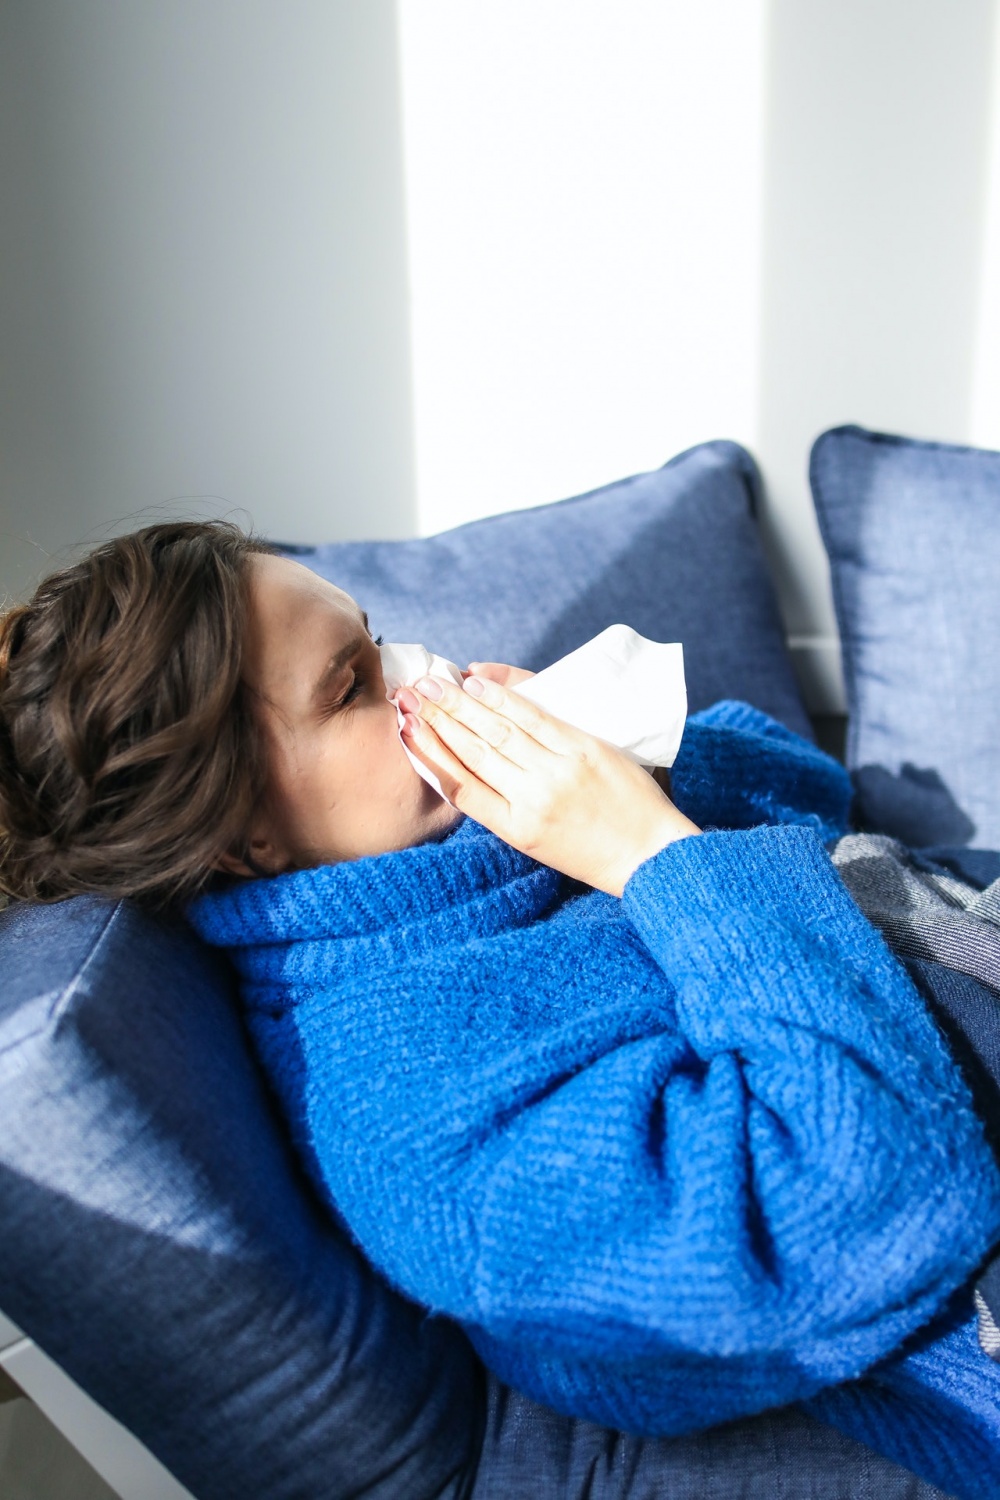 Seven Things to Do If You Wake up Sick